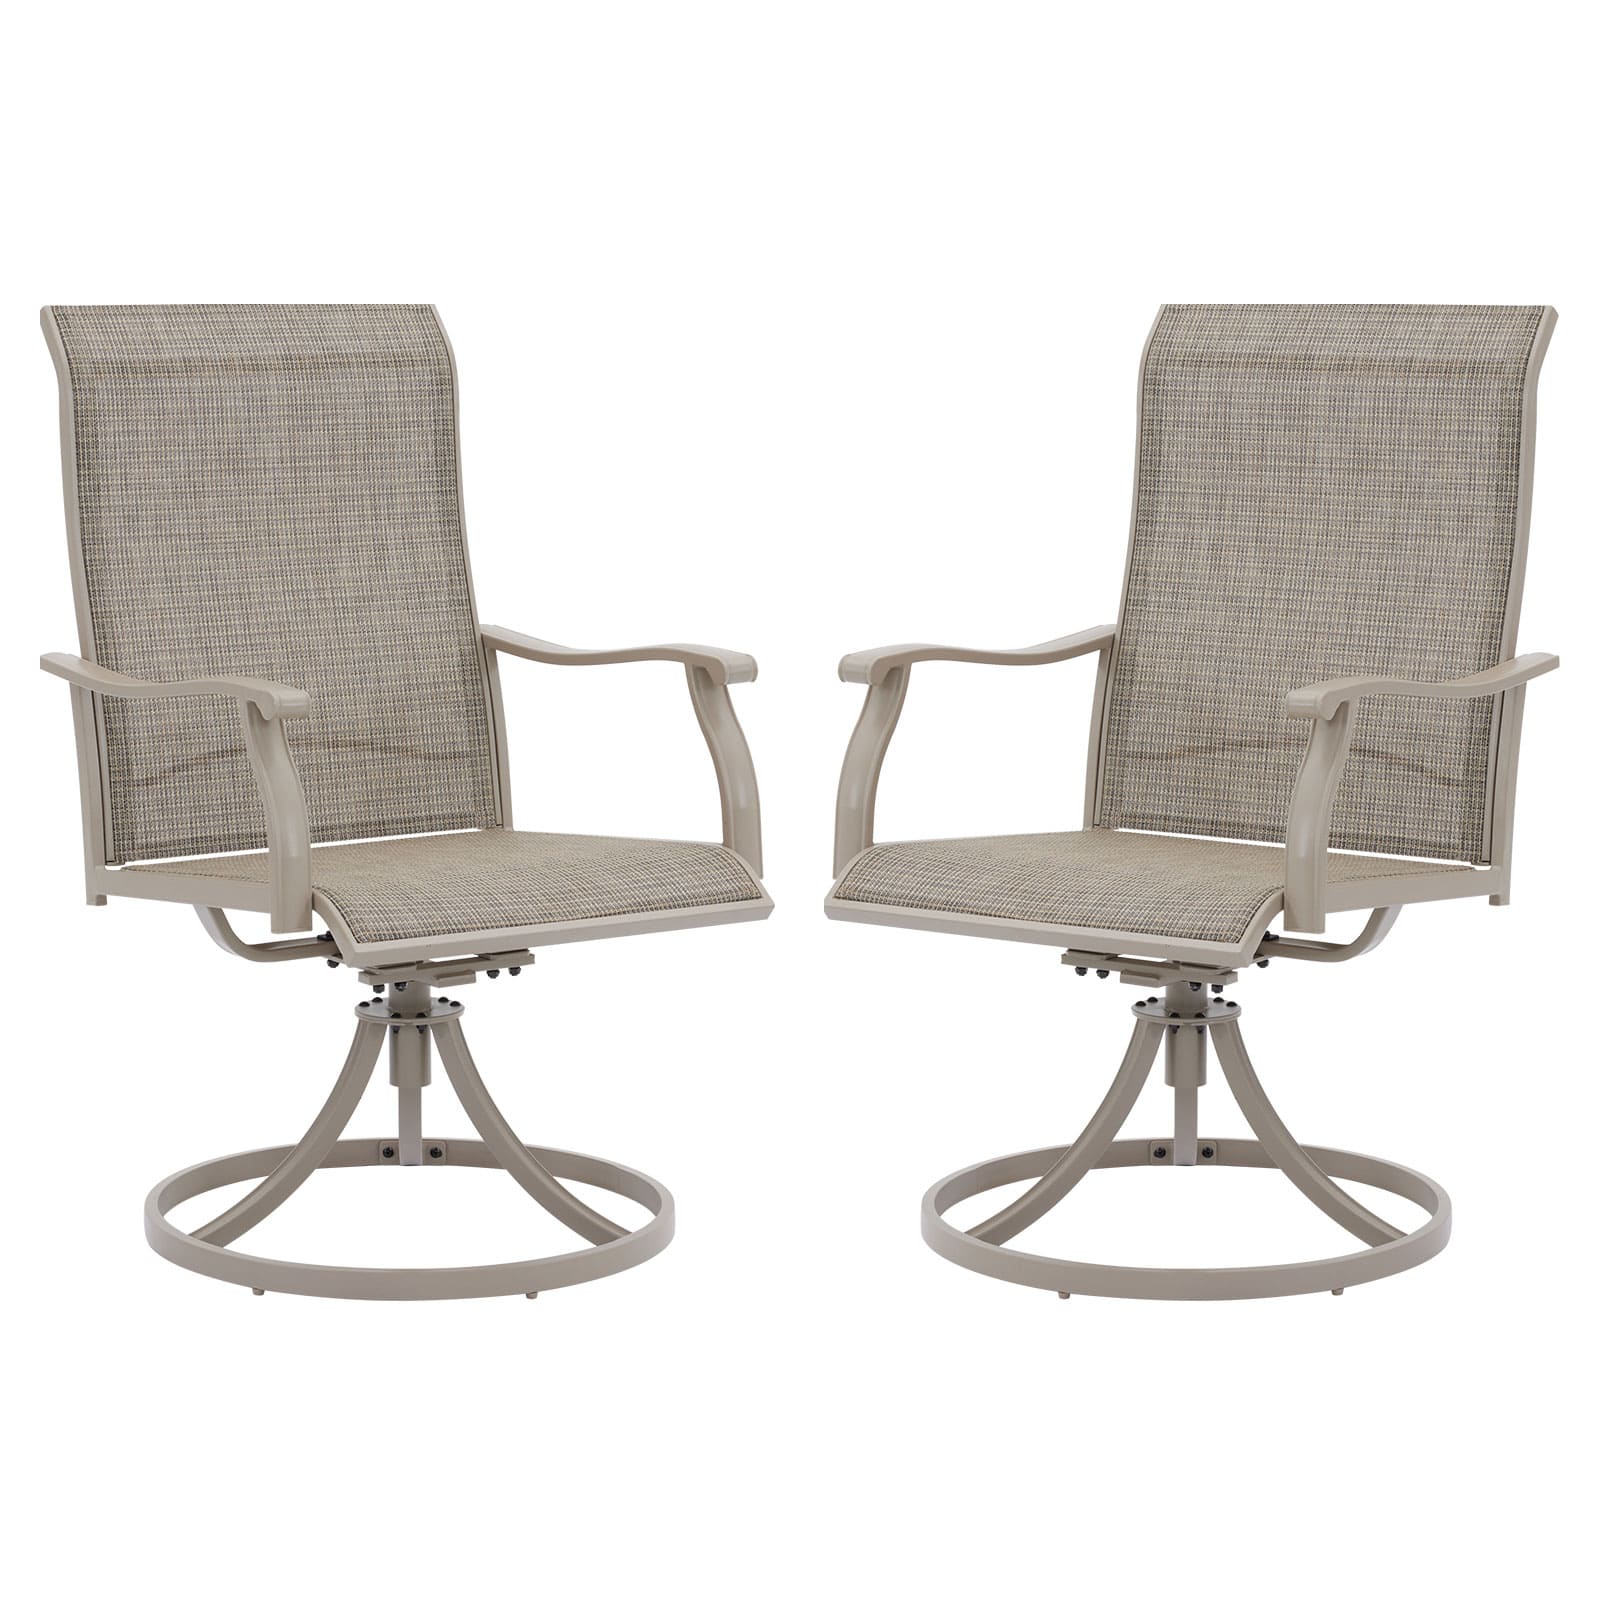 Vicllax Patio Swivel Chairs Set of 2/4/6, Outdoor High Back Dining Chair